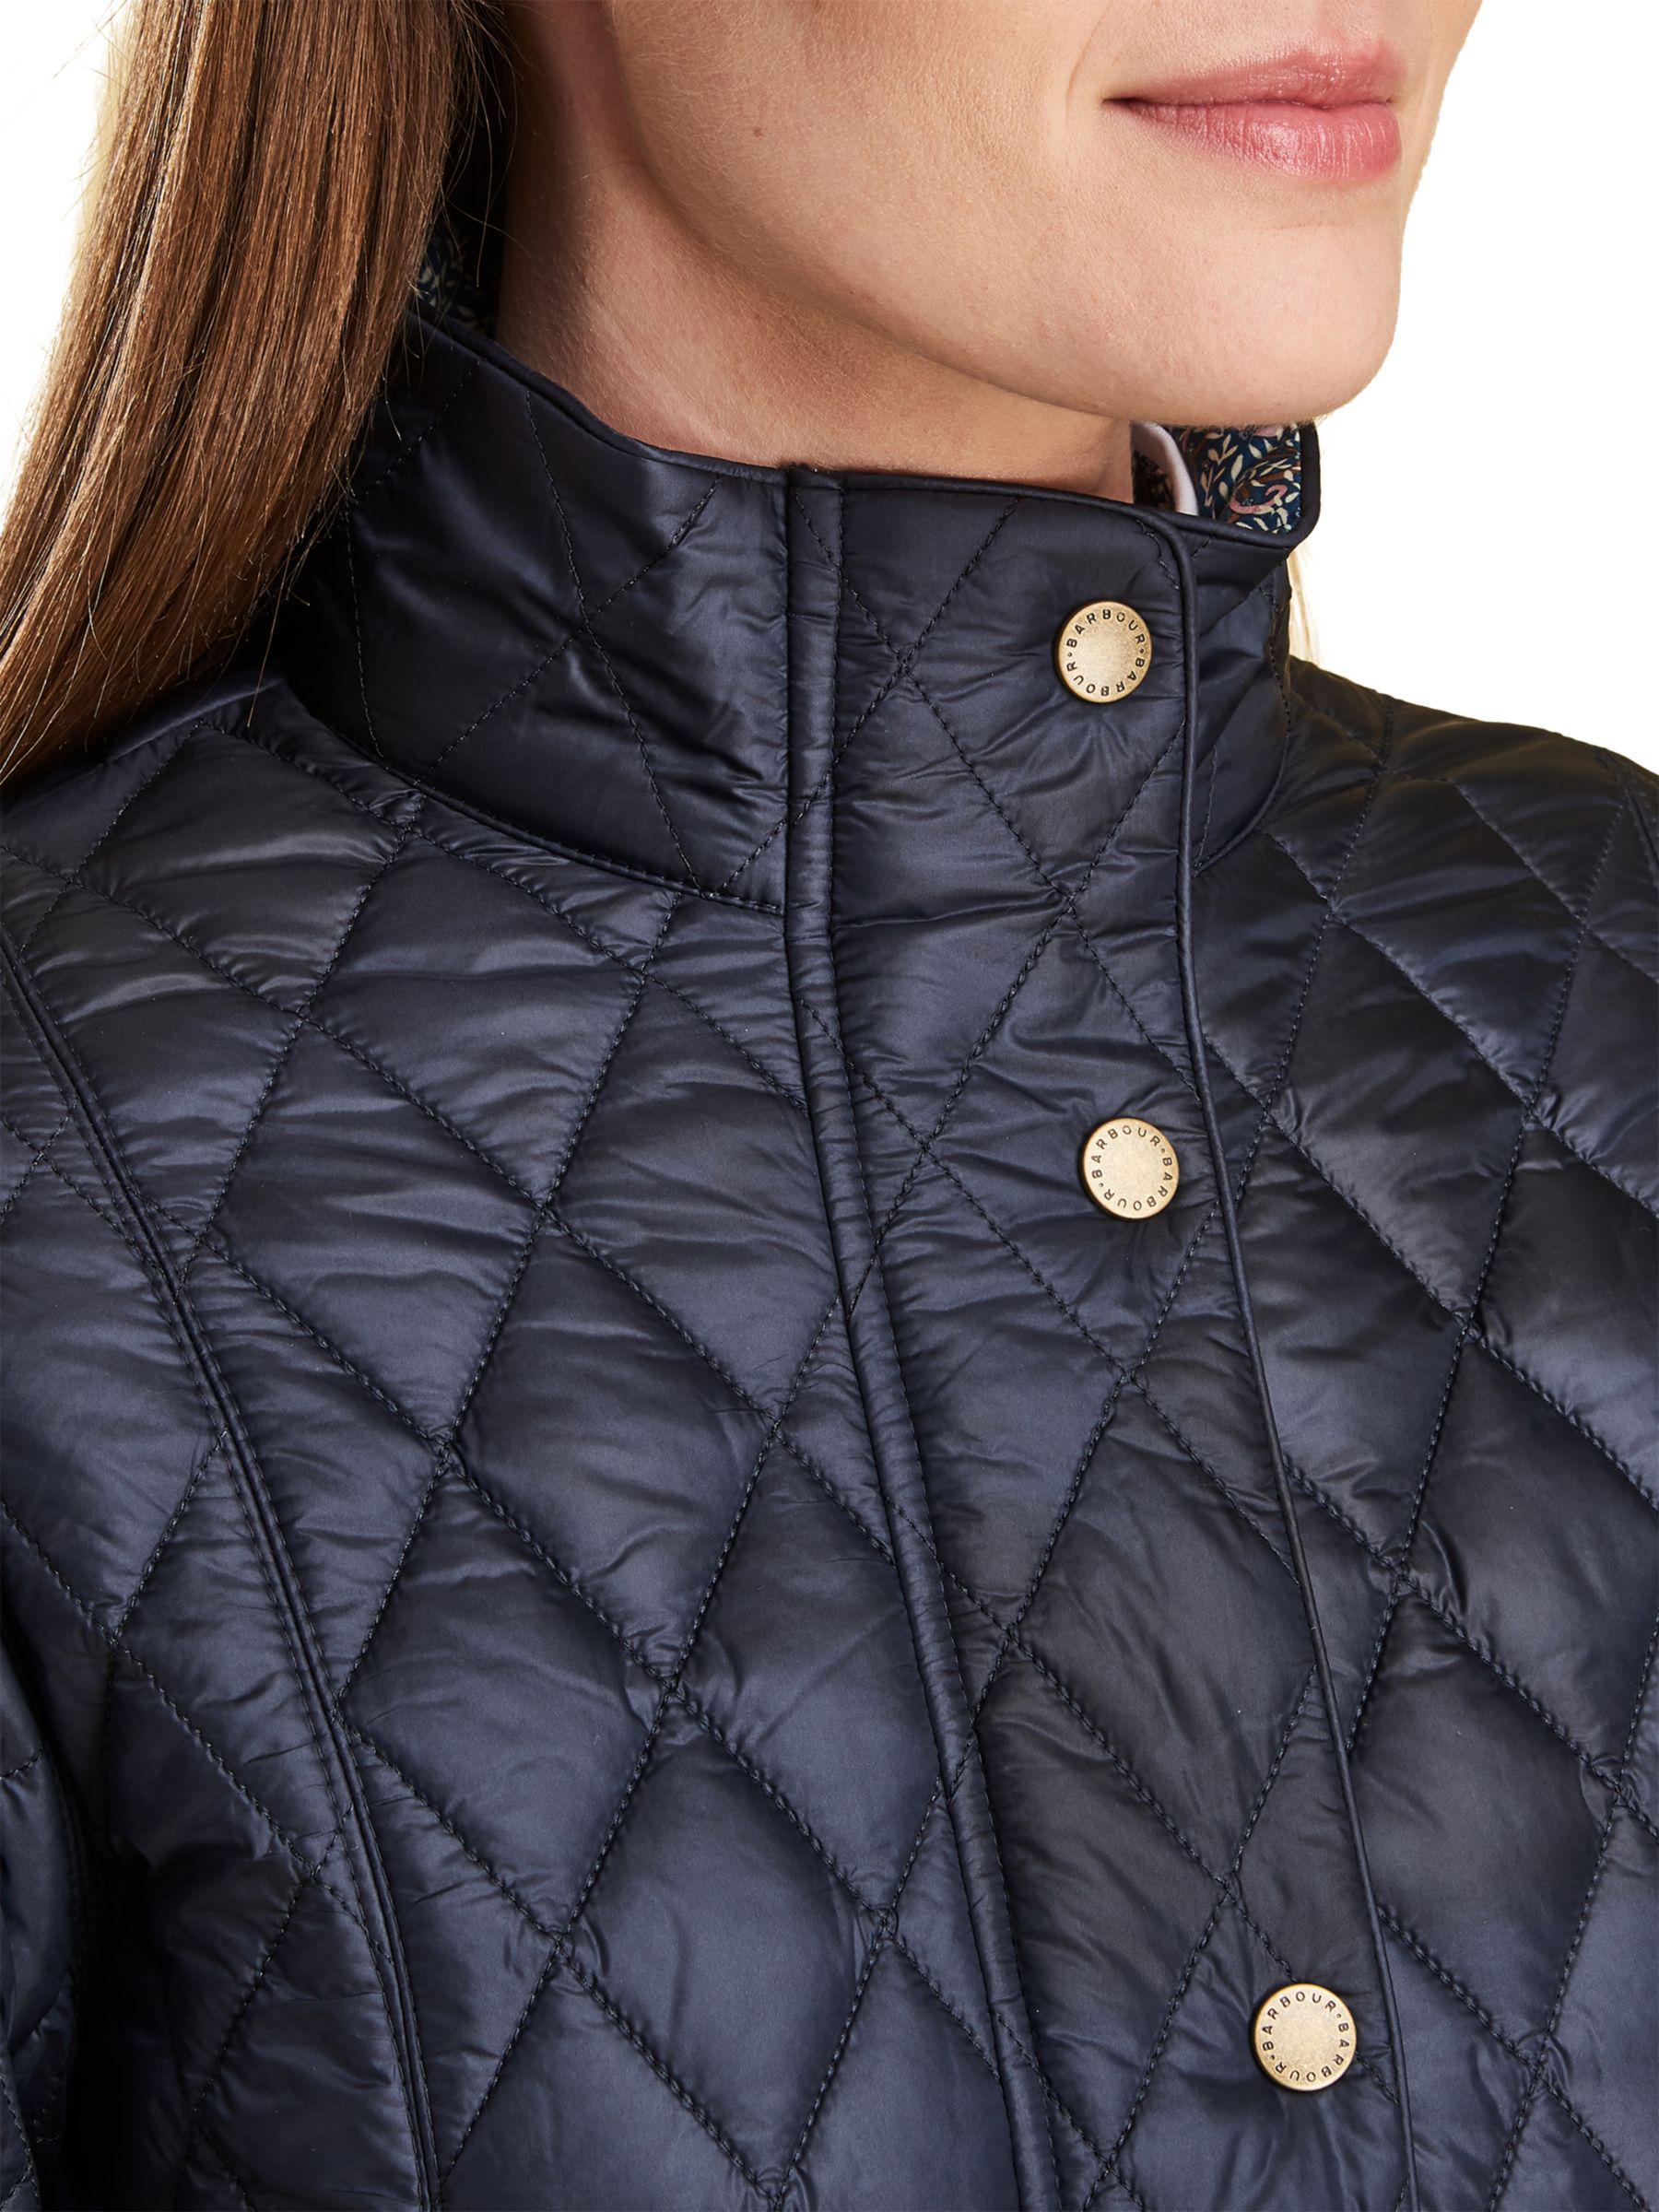 Victoria Liberty Quilted Jacket in Navy 